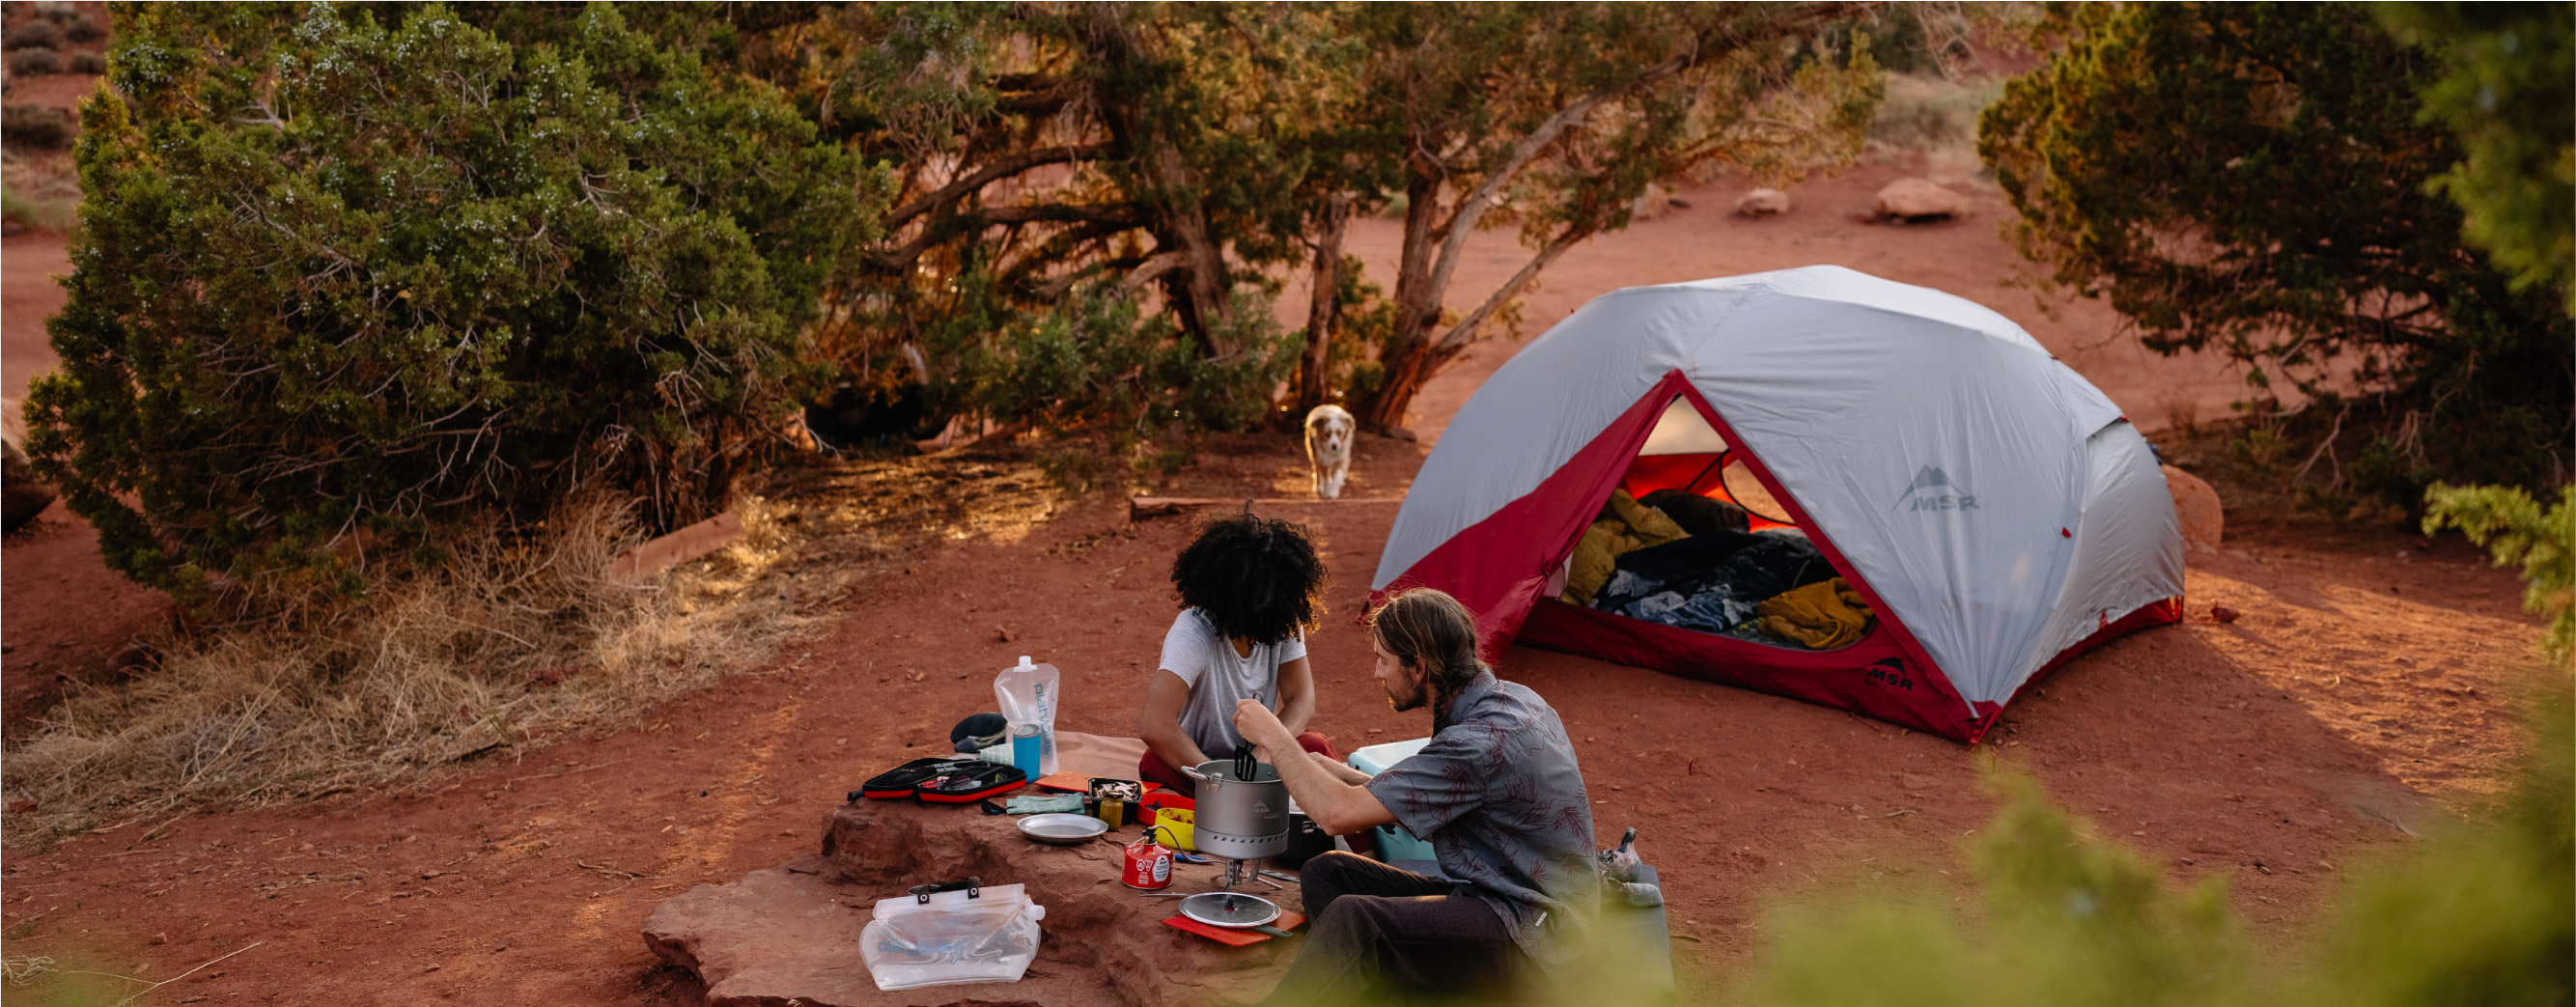 Camping Collection - Amp up your camp comfort.